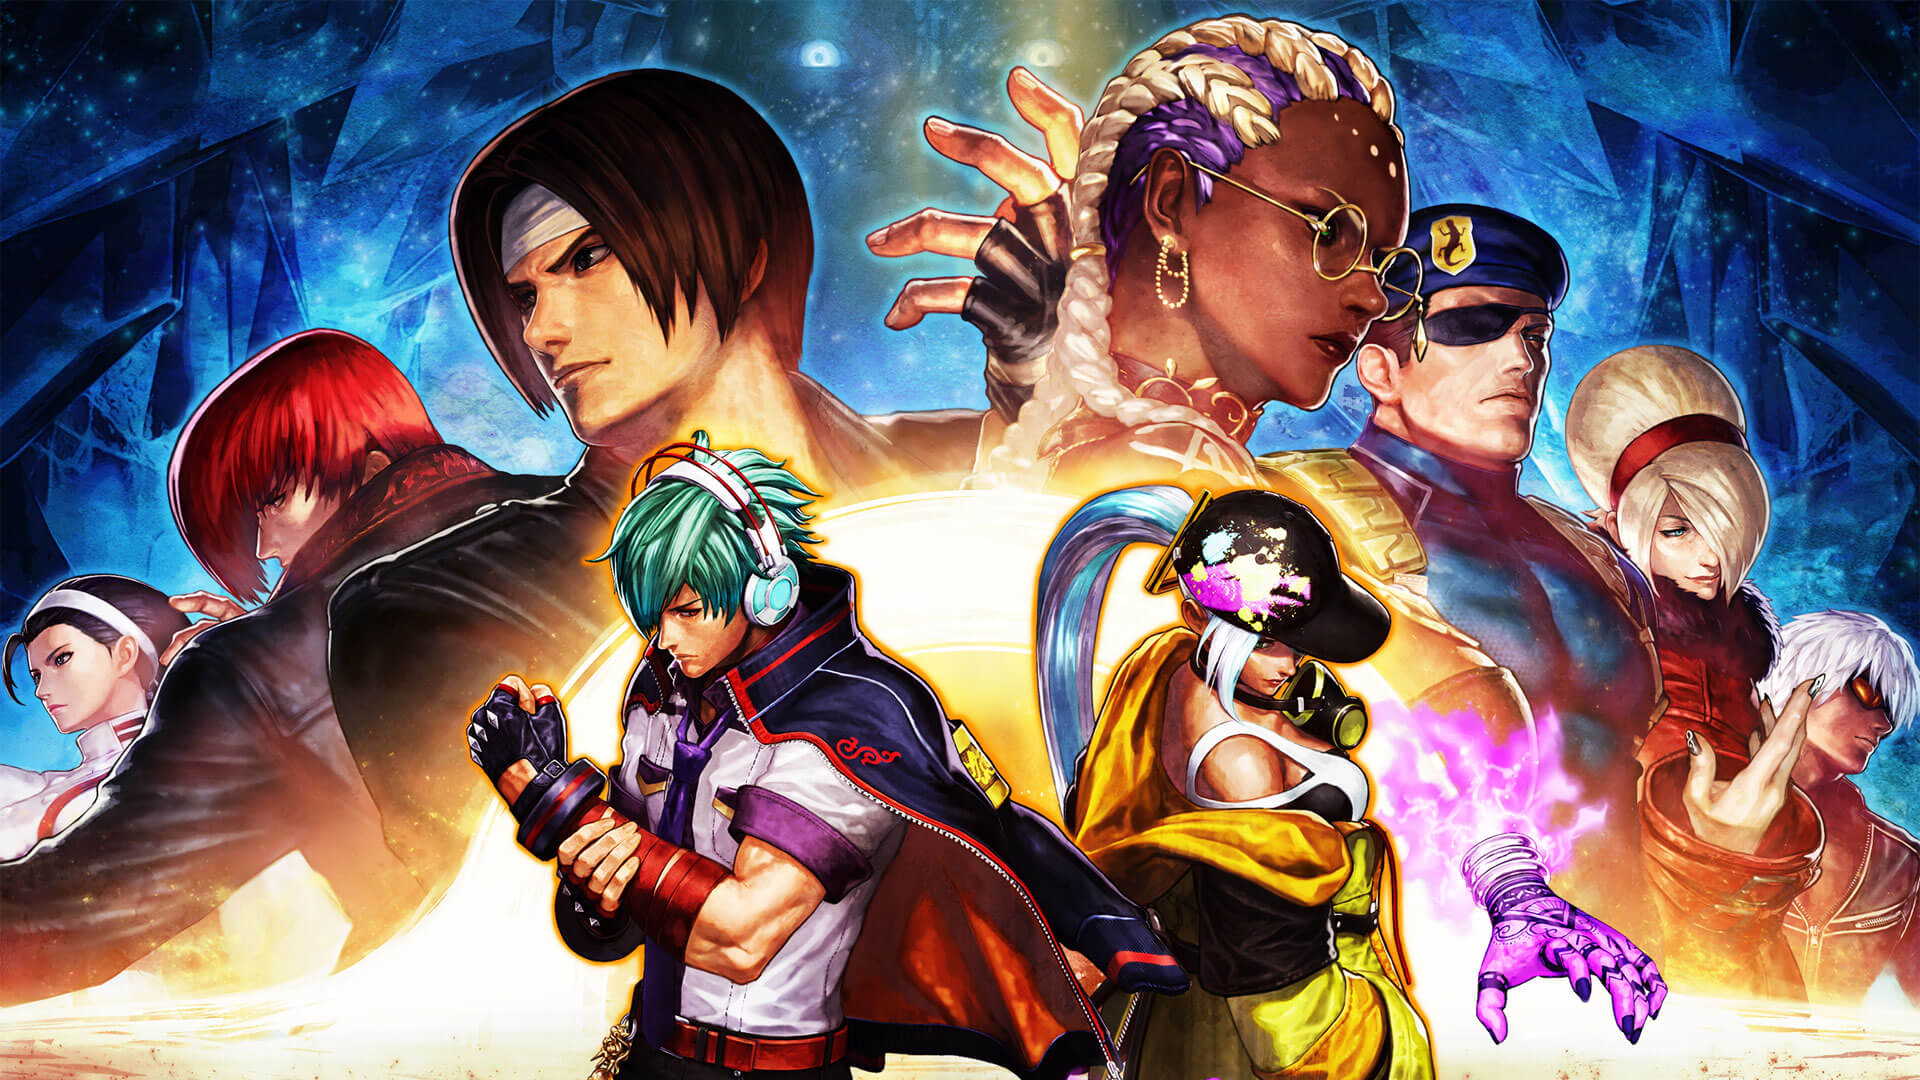 Season 2 of The King of Fighters XV begins!